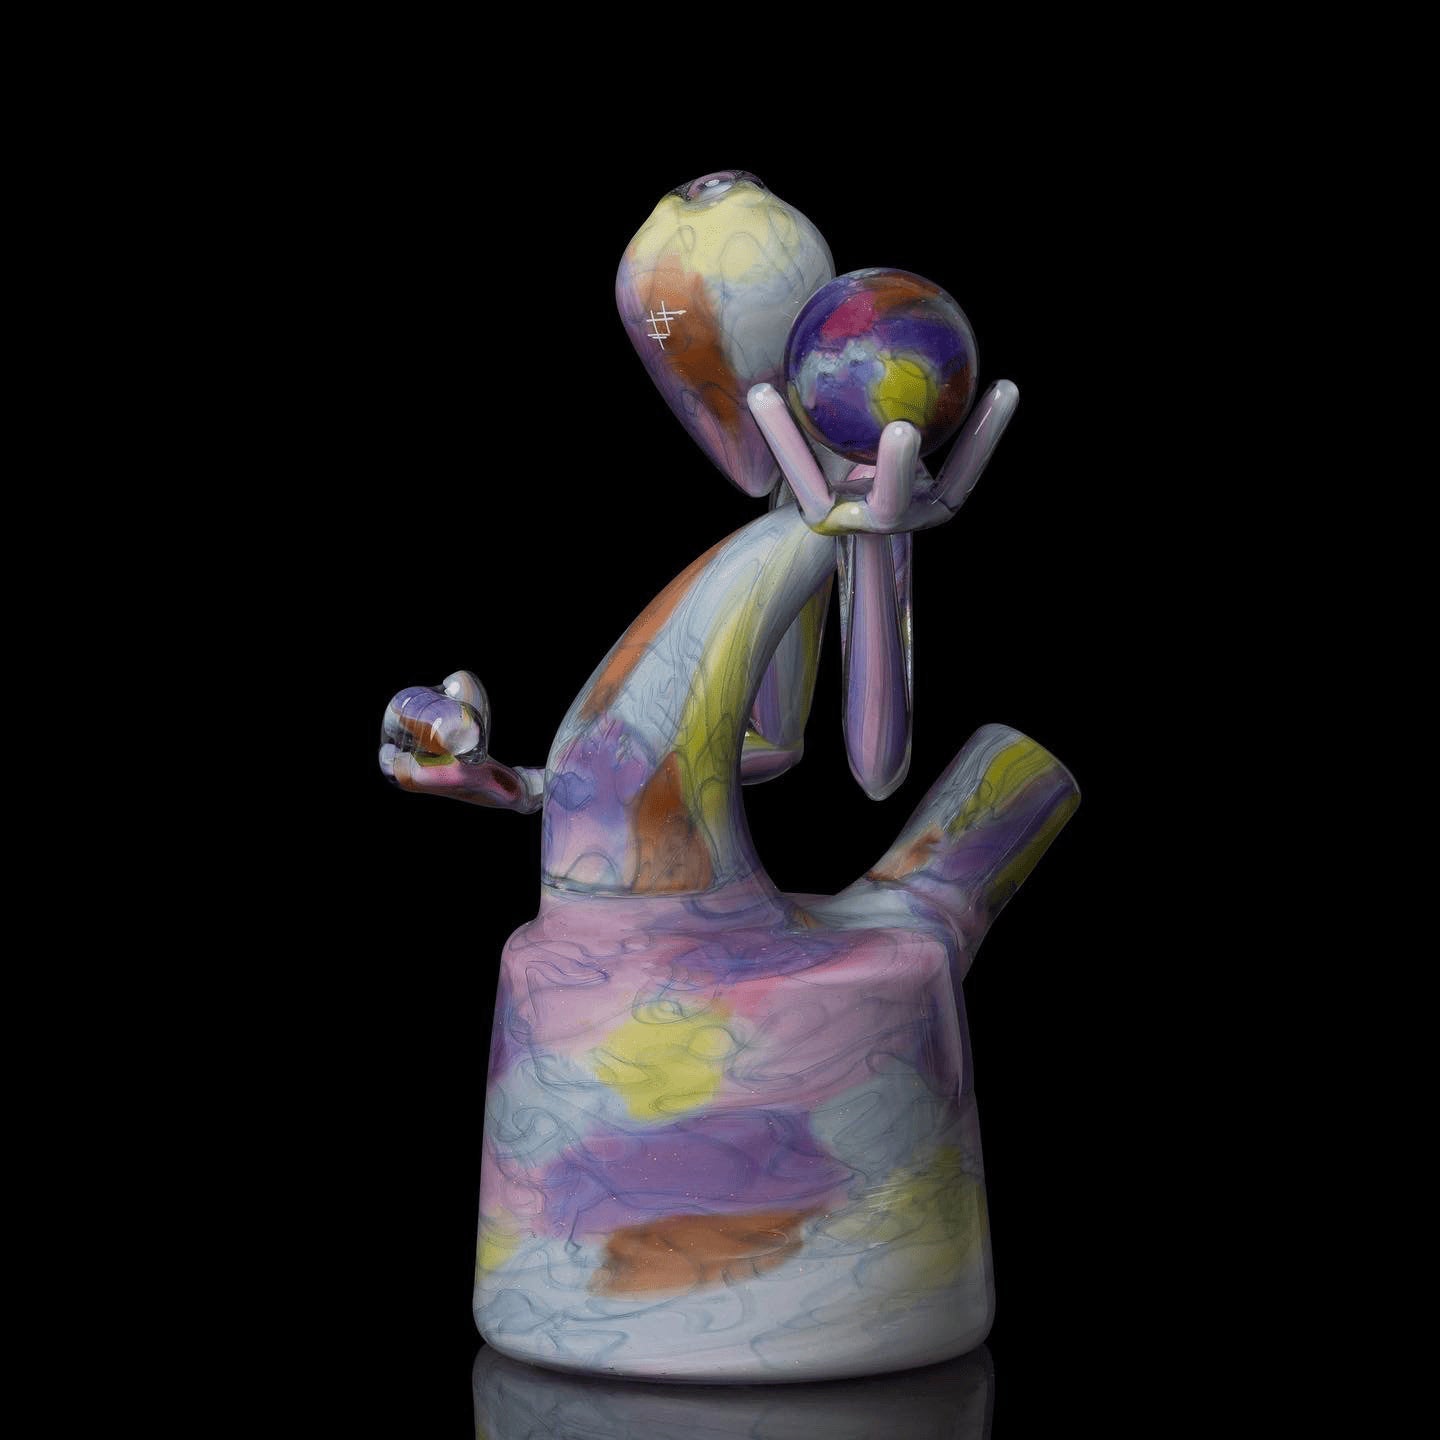 heady art piece - Collab Marble Collector by Yunk Glass x Scomo Moanet (Scribble Season 2022)